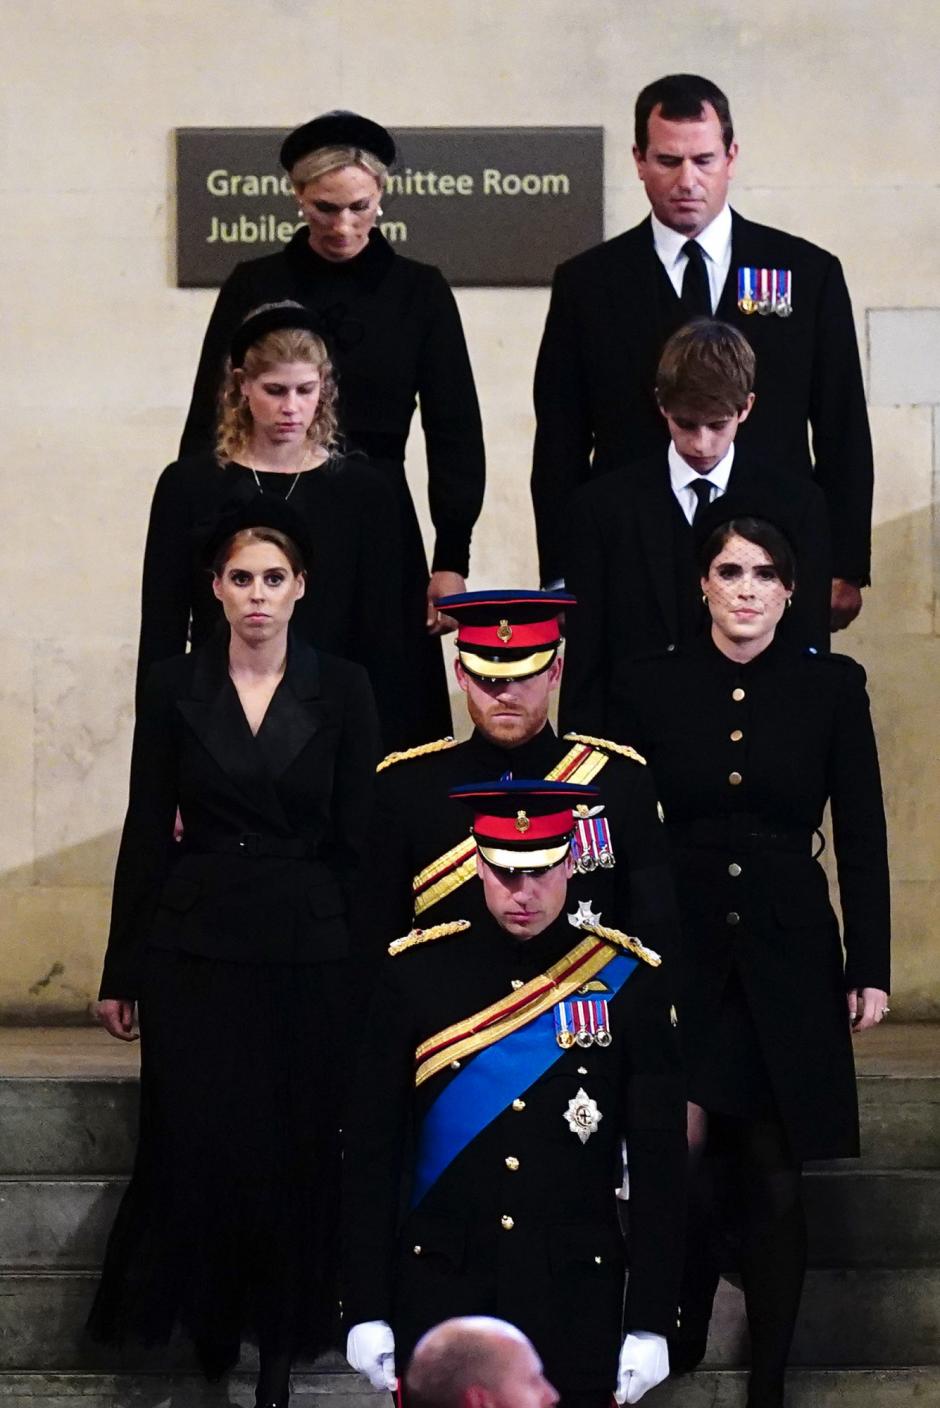 Queen Elizabeth II 's grandchildren (L-R) Britain's Prince William, Prince of Wales, Peter Phillips,  Zara Tindall, James, Viscount Severn, Britain's Princess Eugenie of York, Britain's Lady Louise Windsor, Britain's Princess Beatrice of York and Britain's Prince Harry, Duke of Sussex, depart having held a vigil around the coffin of Queen Elizabeth II, draped in the Royal Standard with the Imperial State Crown and the Sovereign's orb and sceptre, lying in state on the catafalque in Westminster Hall, at the Palace of Westminster in London on September 17, 2022, ahead of her funeral on Monday. - Queen Elizabeth II will lie in state in Westminster Hall inside the Palace of Westminster, until 0530 GMT on September 19, a few hours before her funeral, with huge queues expected to file past her coffin to pay their respects. (Photo by Chris Jackson / POOL / AFP)